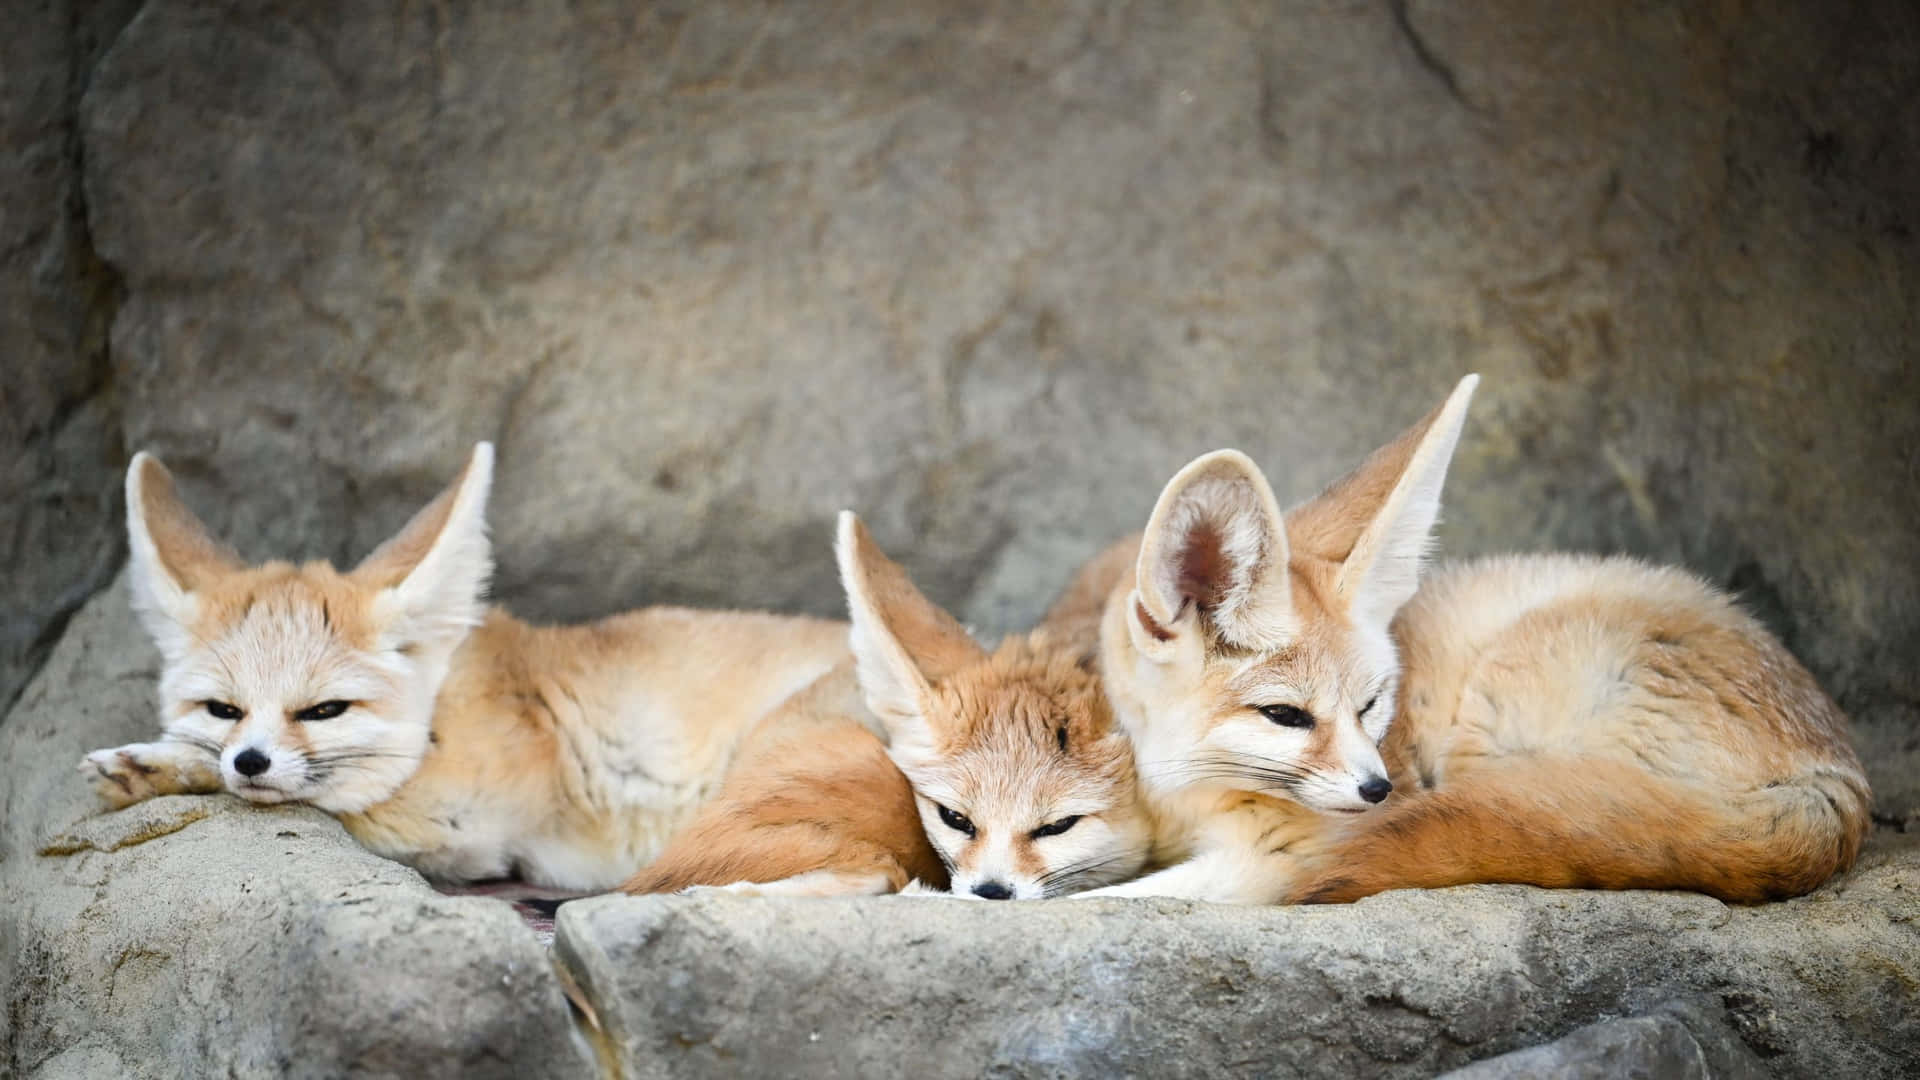 "The beauty of young foxes - how cute do they look?"